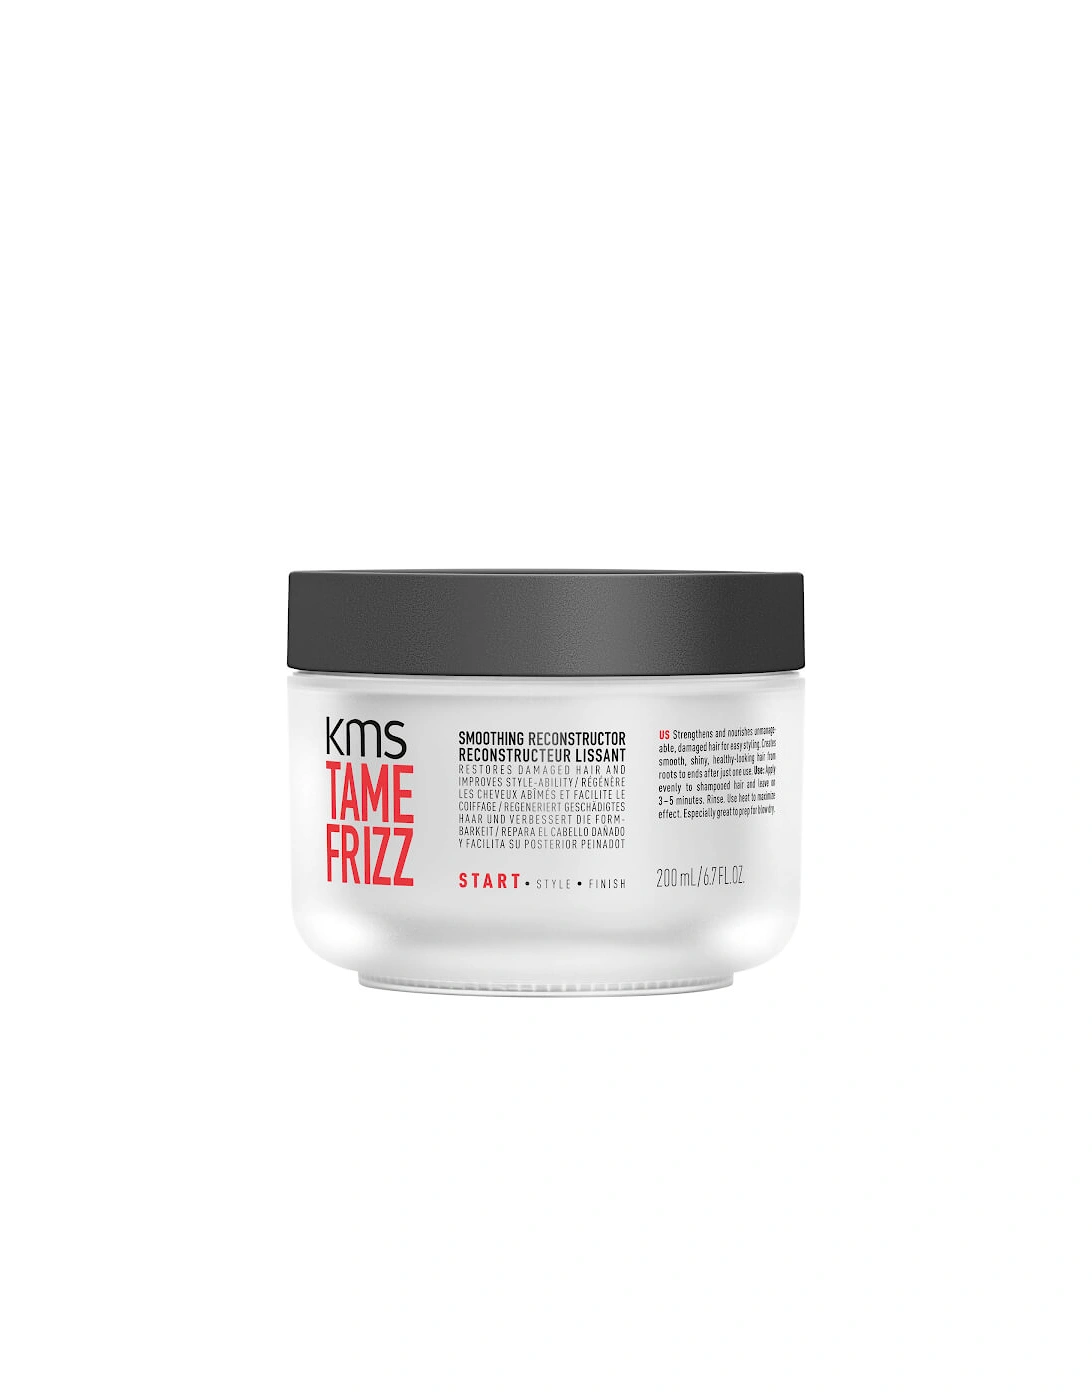 Tame Frizz Smoothing Reconstructor 200ml - KMS, 2 of 1